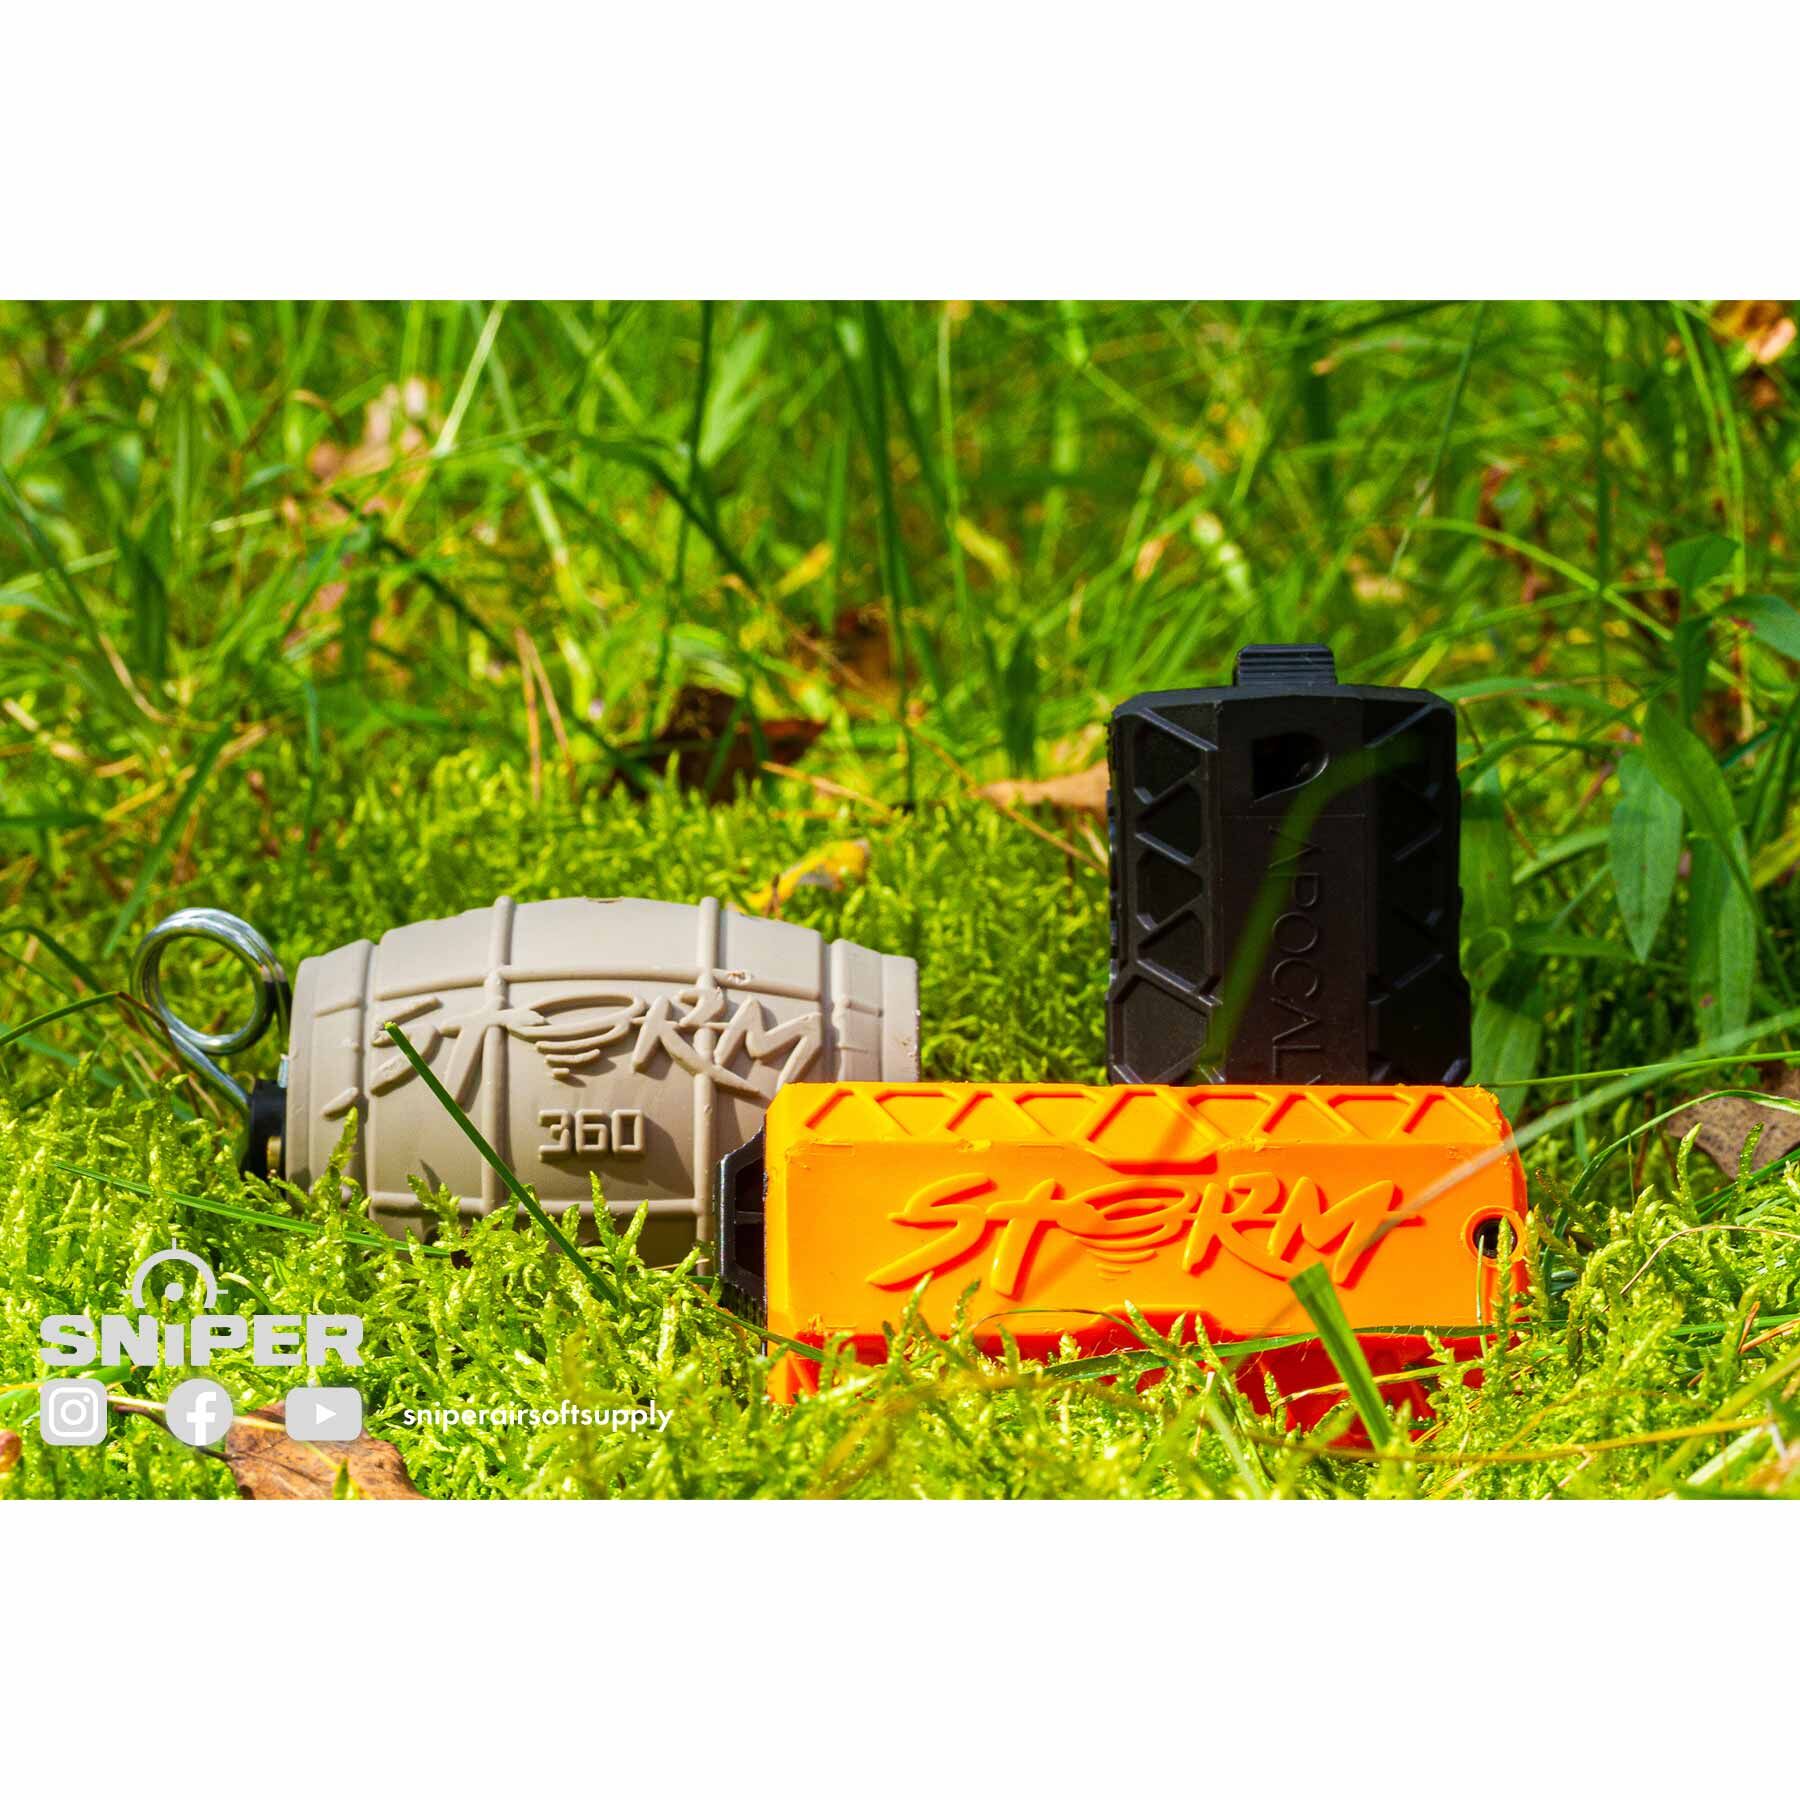 ASG Storm Apocalypse Impact Hand Grenade - Airsoft Extreme